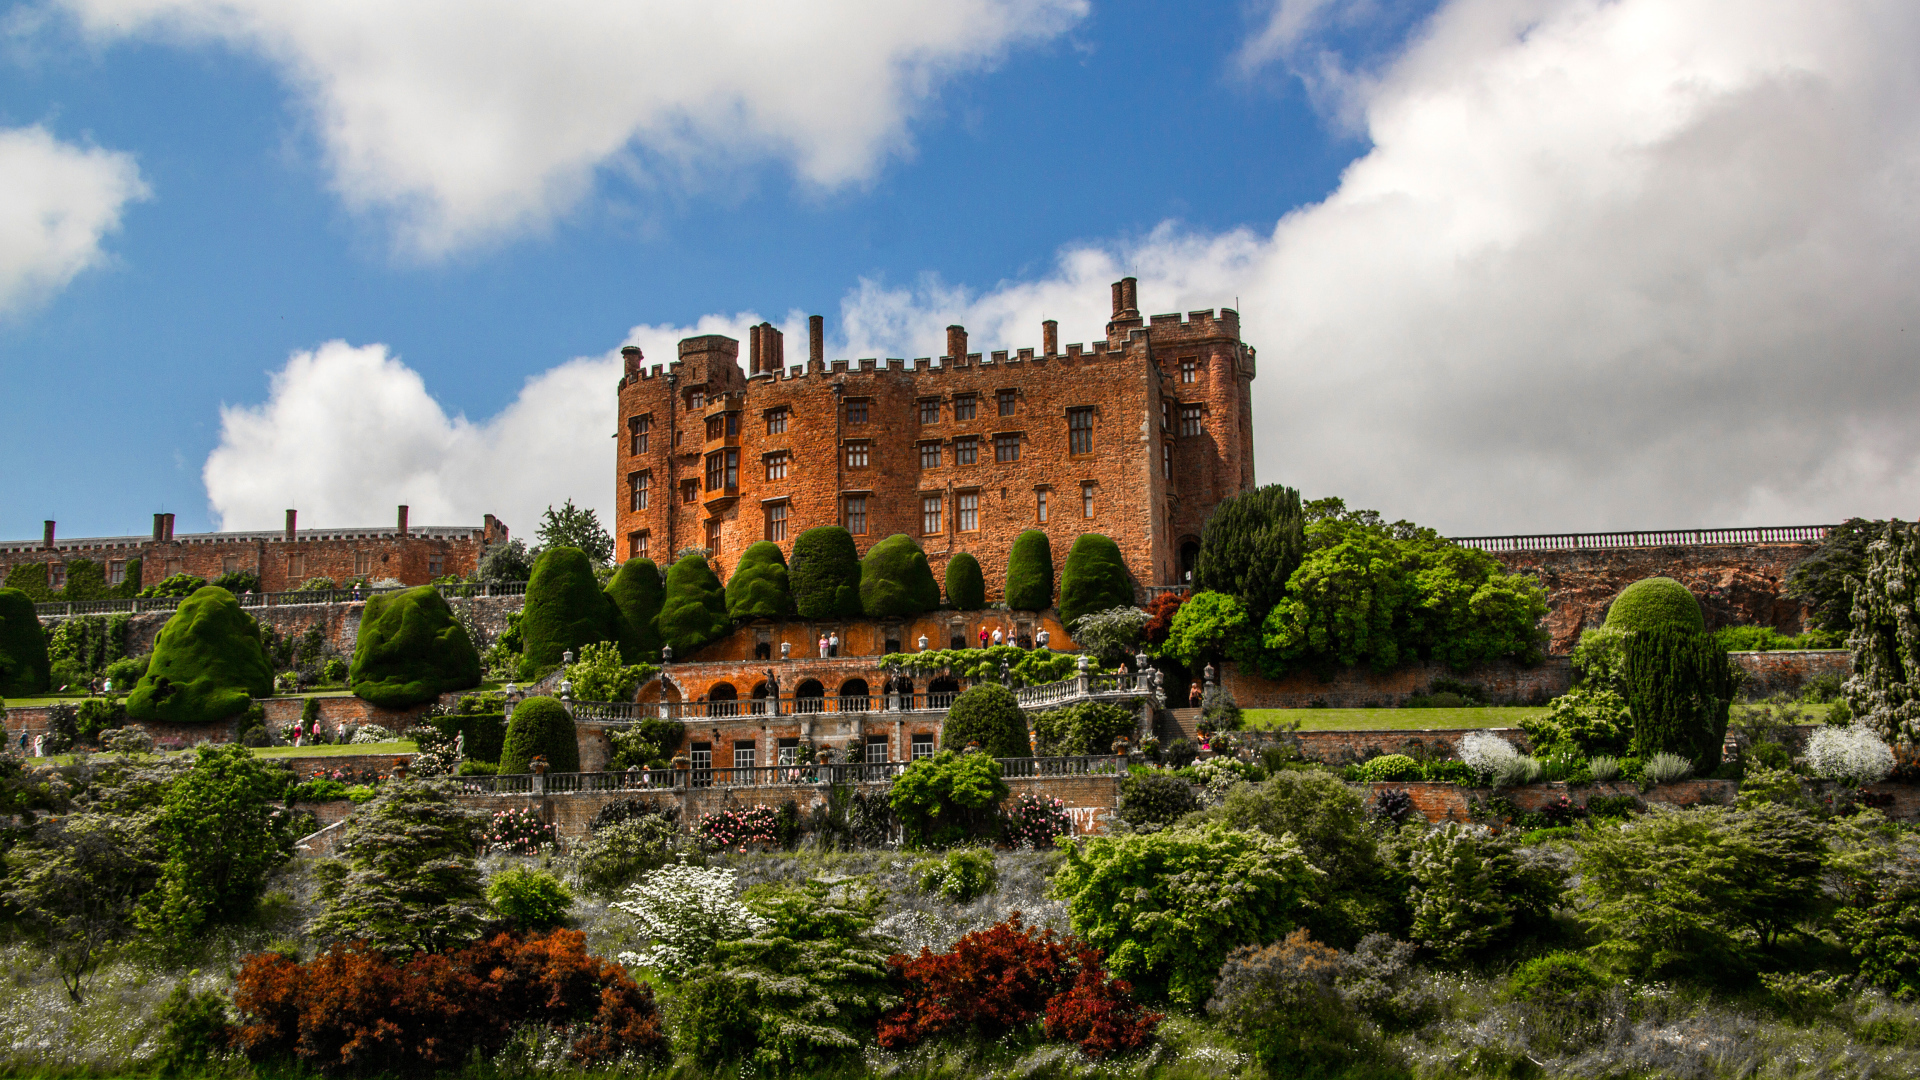 View of Castle Powis Castle with beautiful gardens, UK